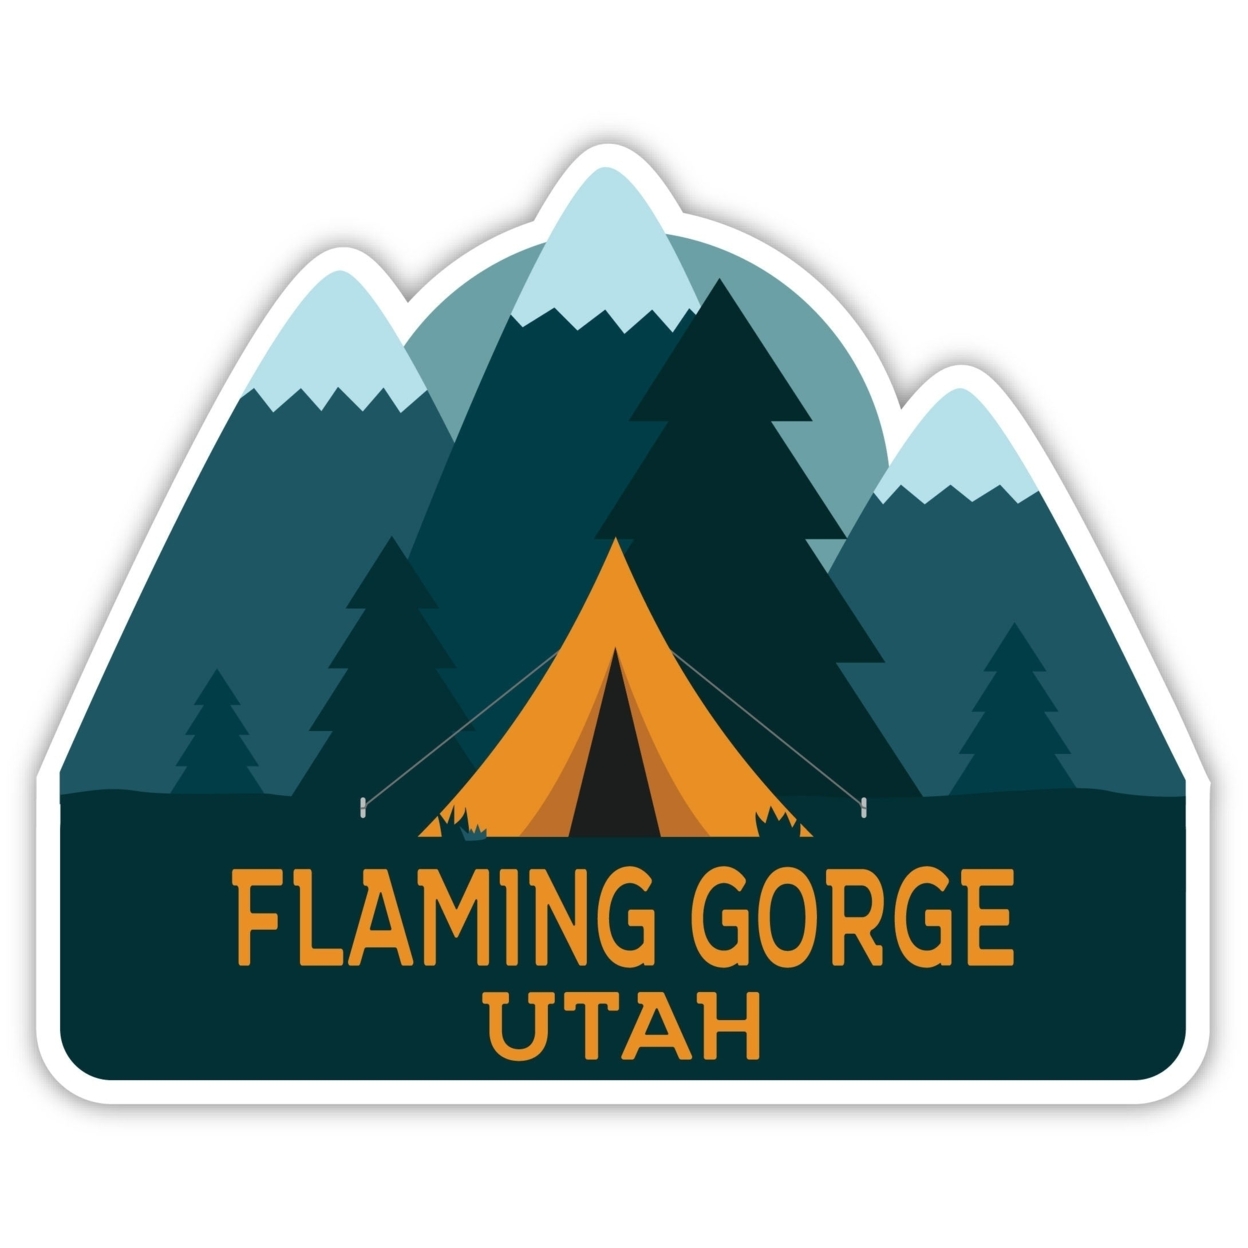 Flaming Gorge Utah Souvenir Decorative Stickers (Choose Theme And Size) - 4-Pack, 12-Inch, Camp Life